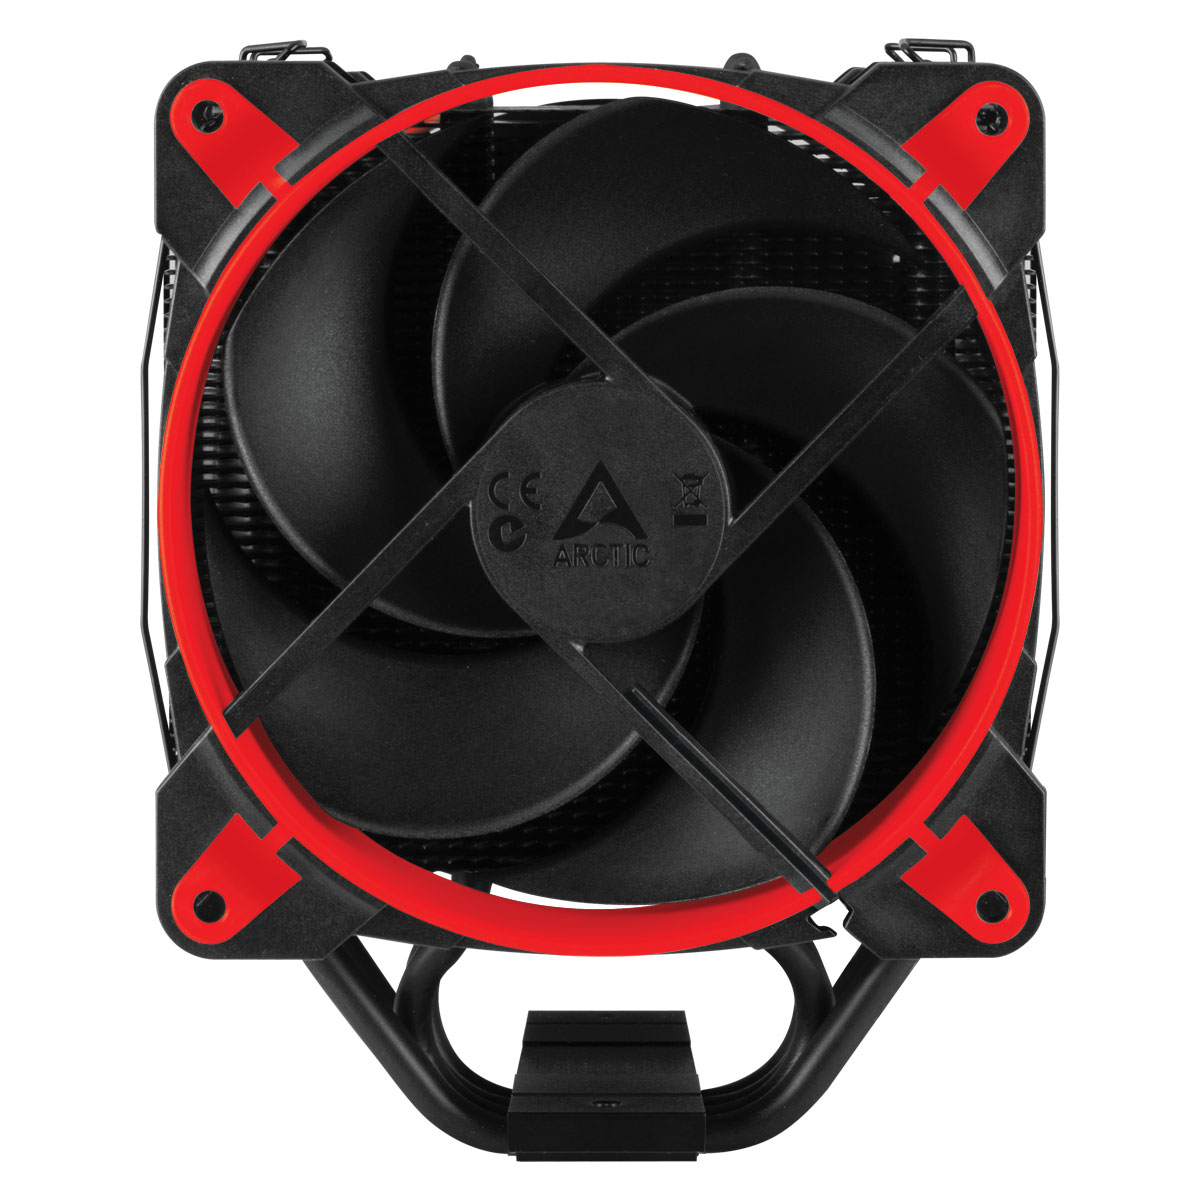 Tower CPU Cooler with Push-Pull Configuration ARCTIC Freezer 34 eSports DUO (Red) Rear View